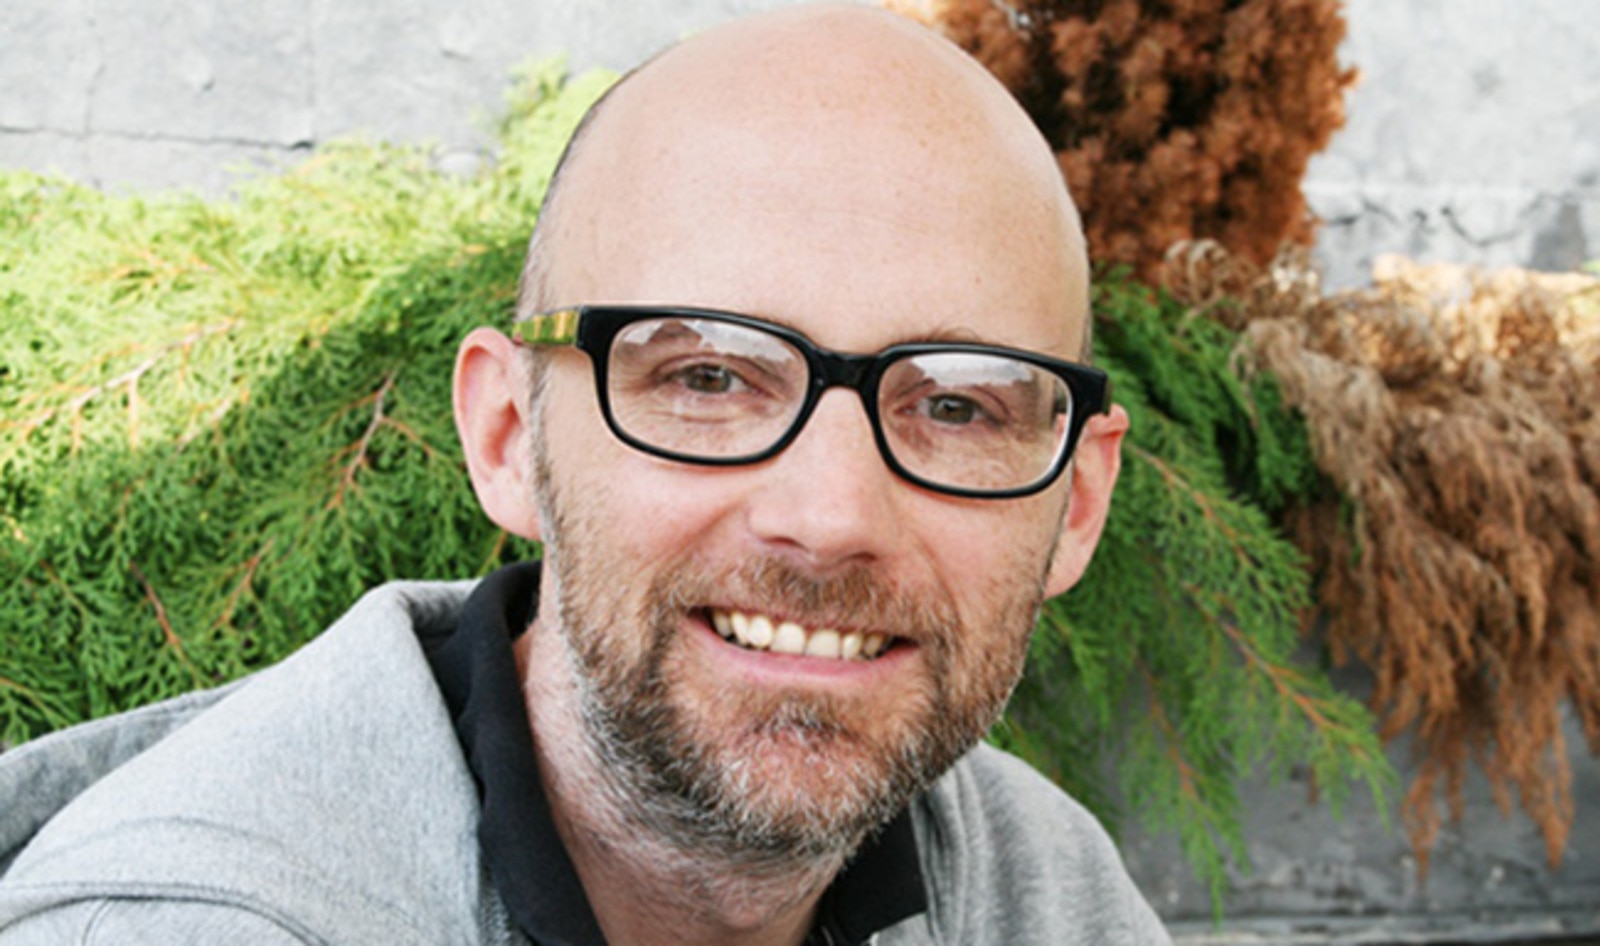 Moby Sells His $1.3 Million House to Benefit Farmed Animals